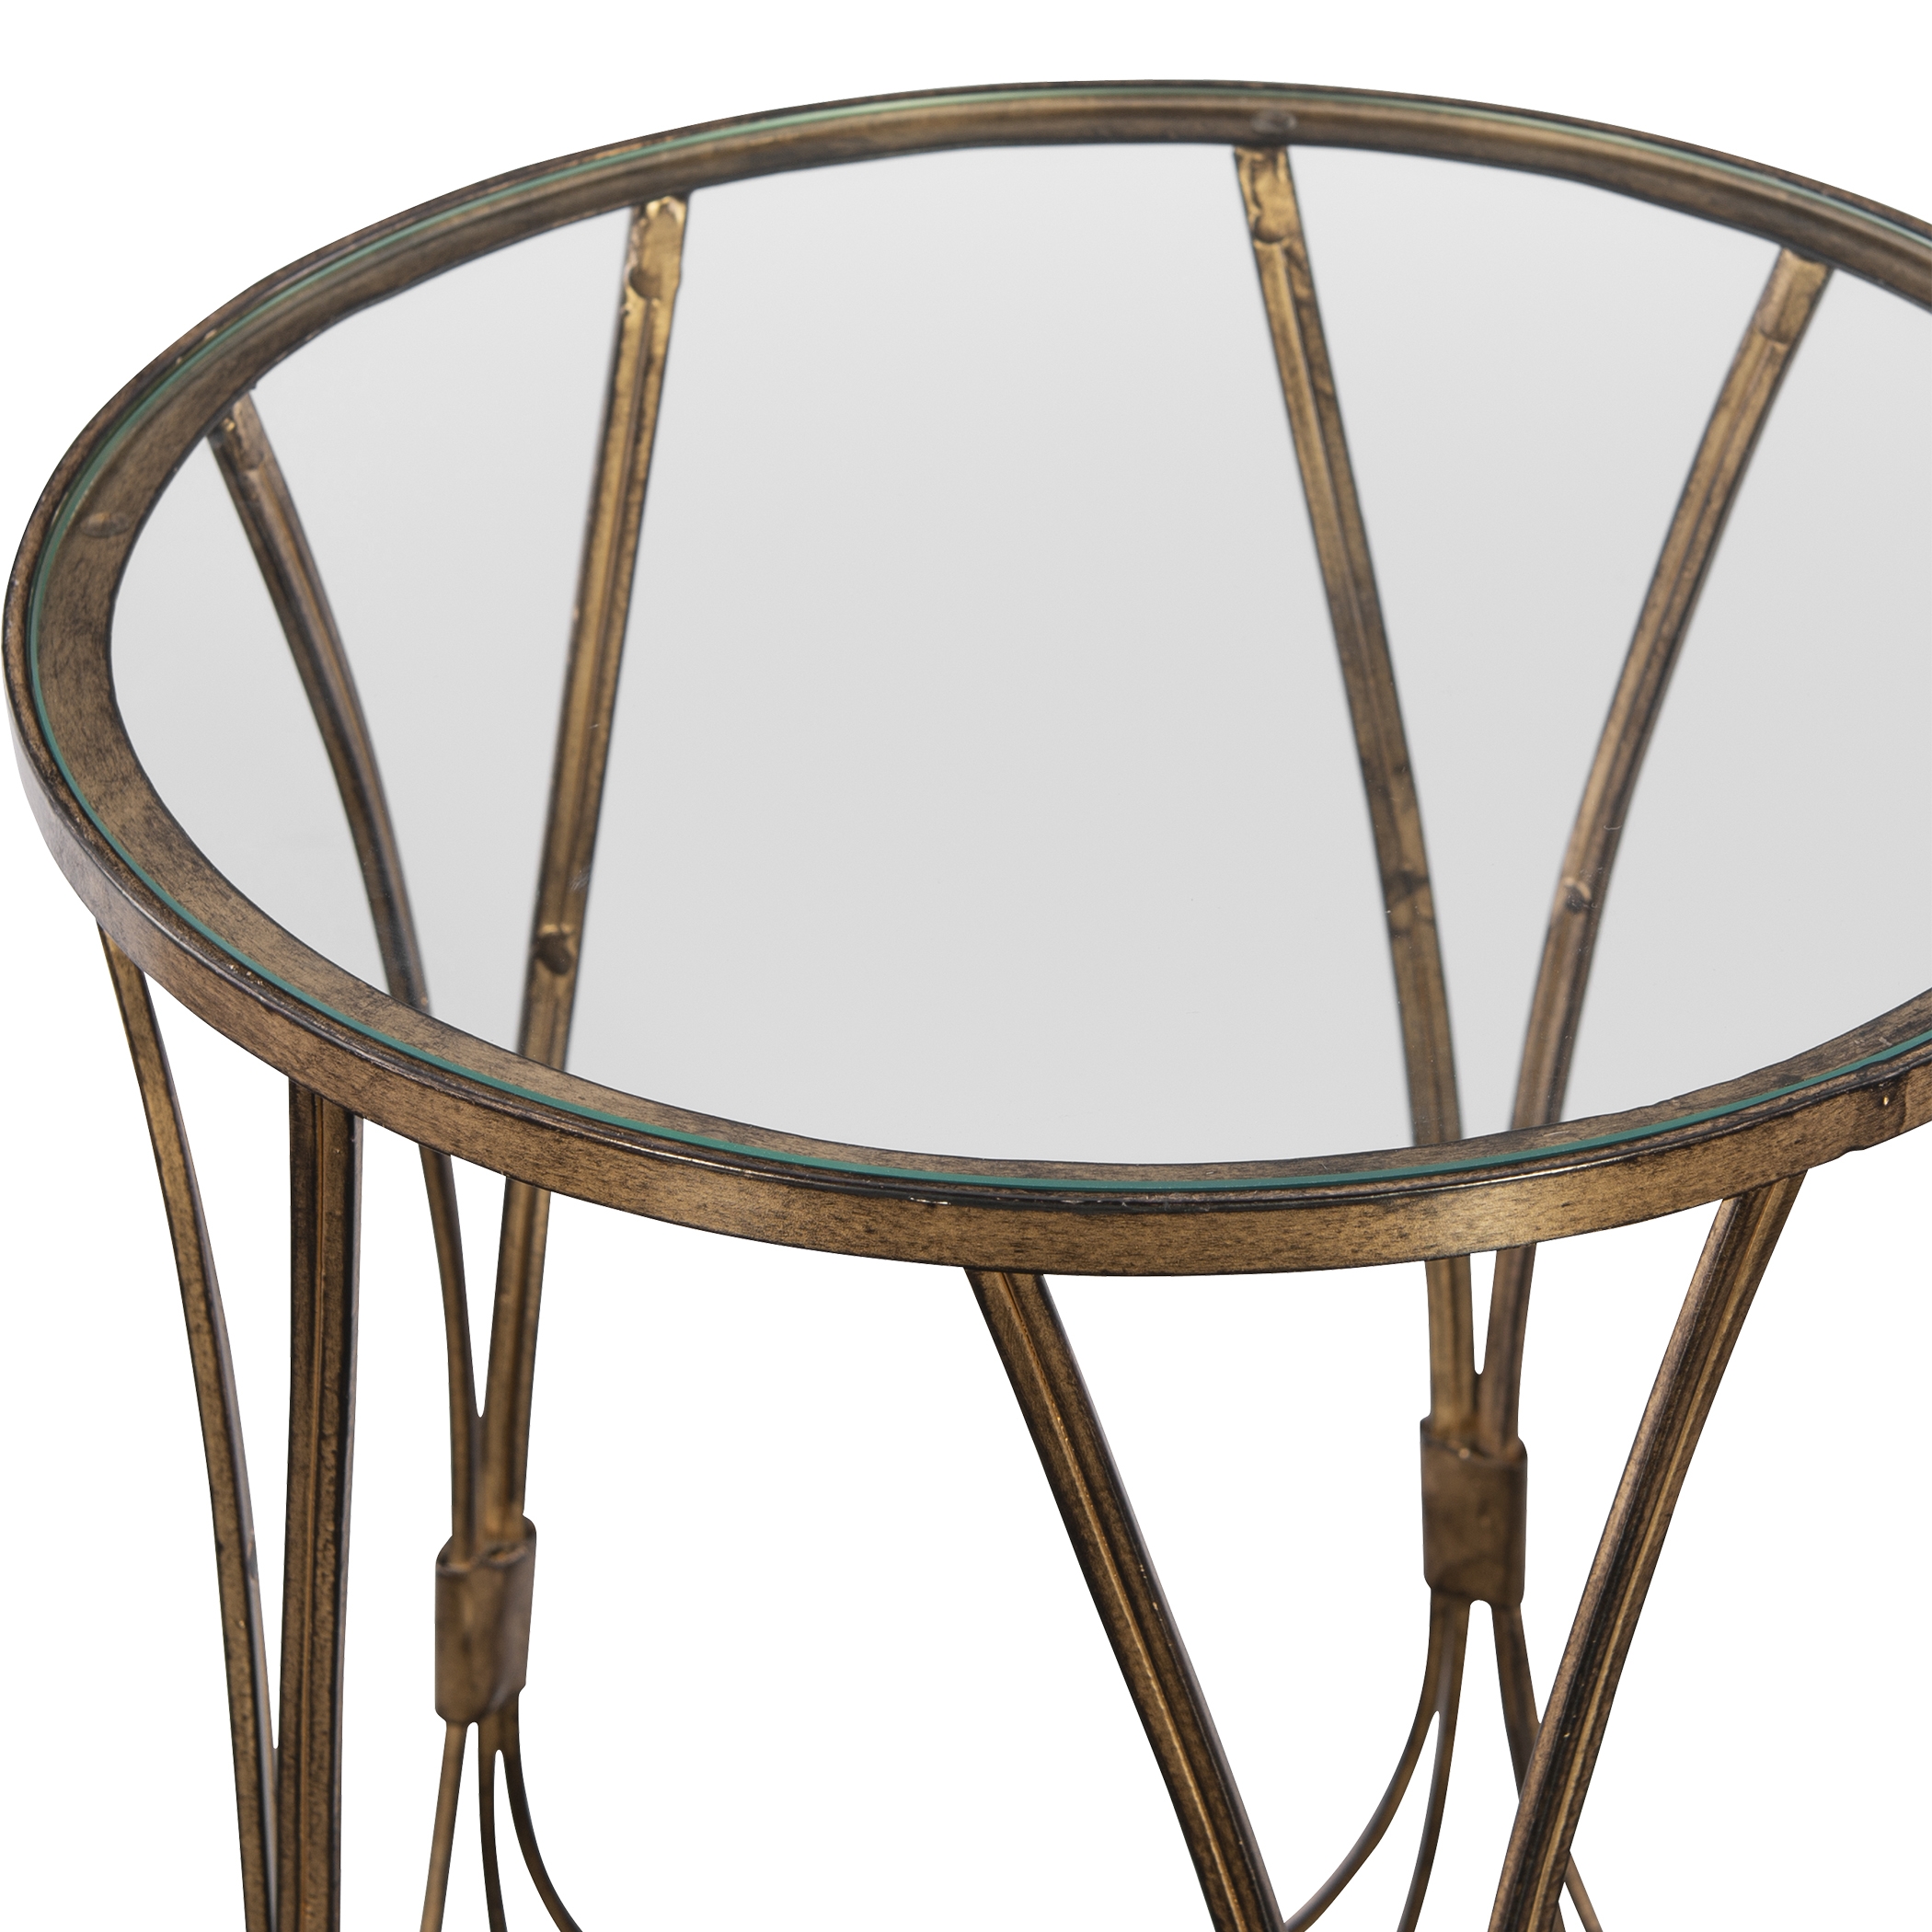 Kalindra Gold Accent Table - Image 1